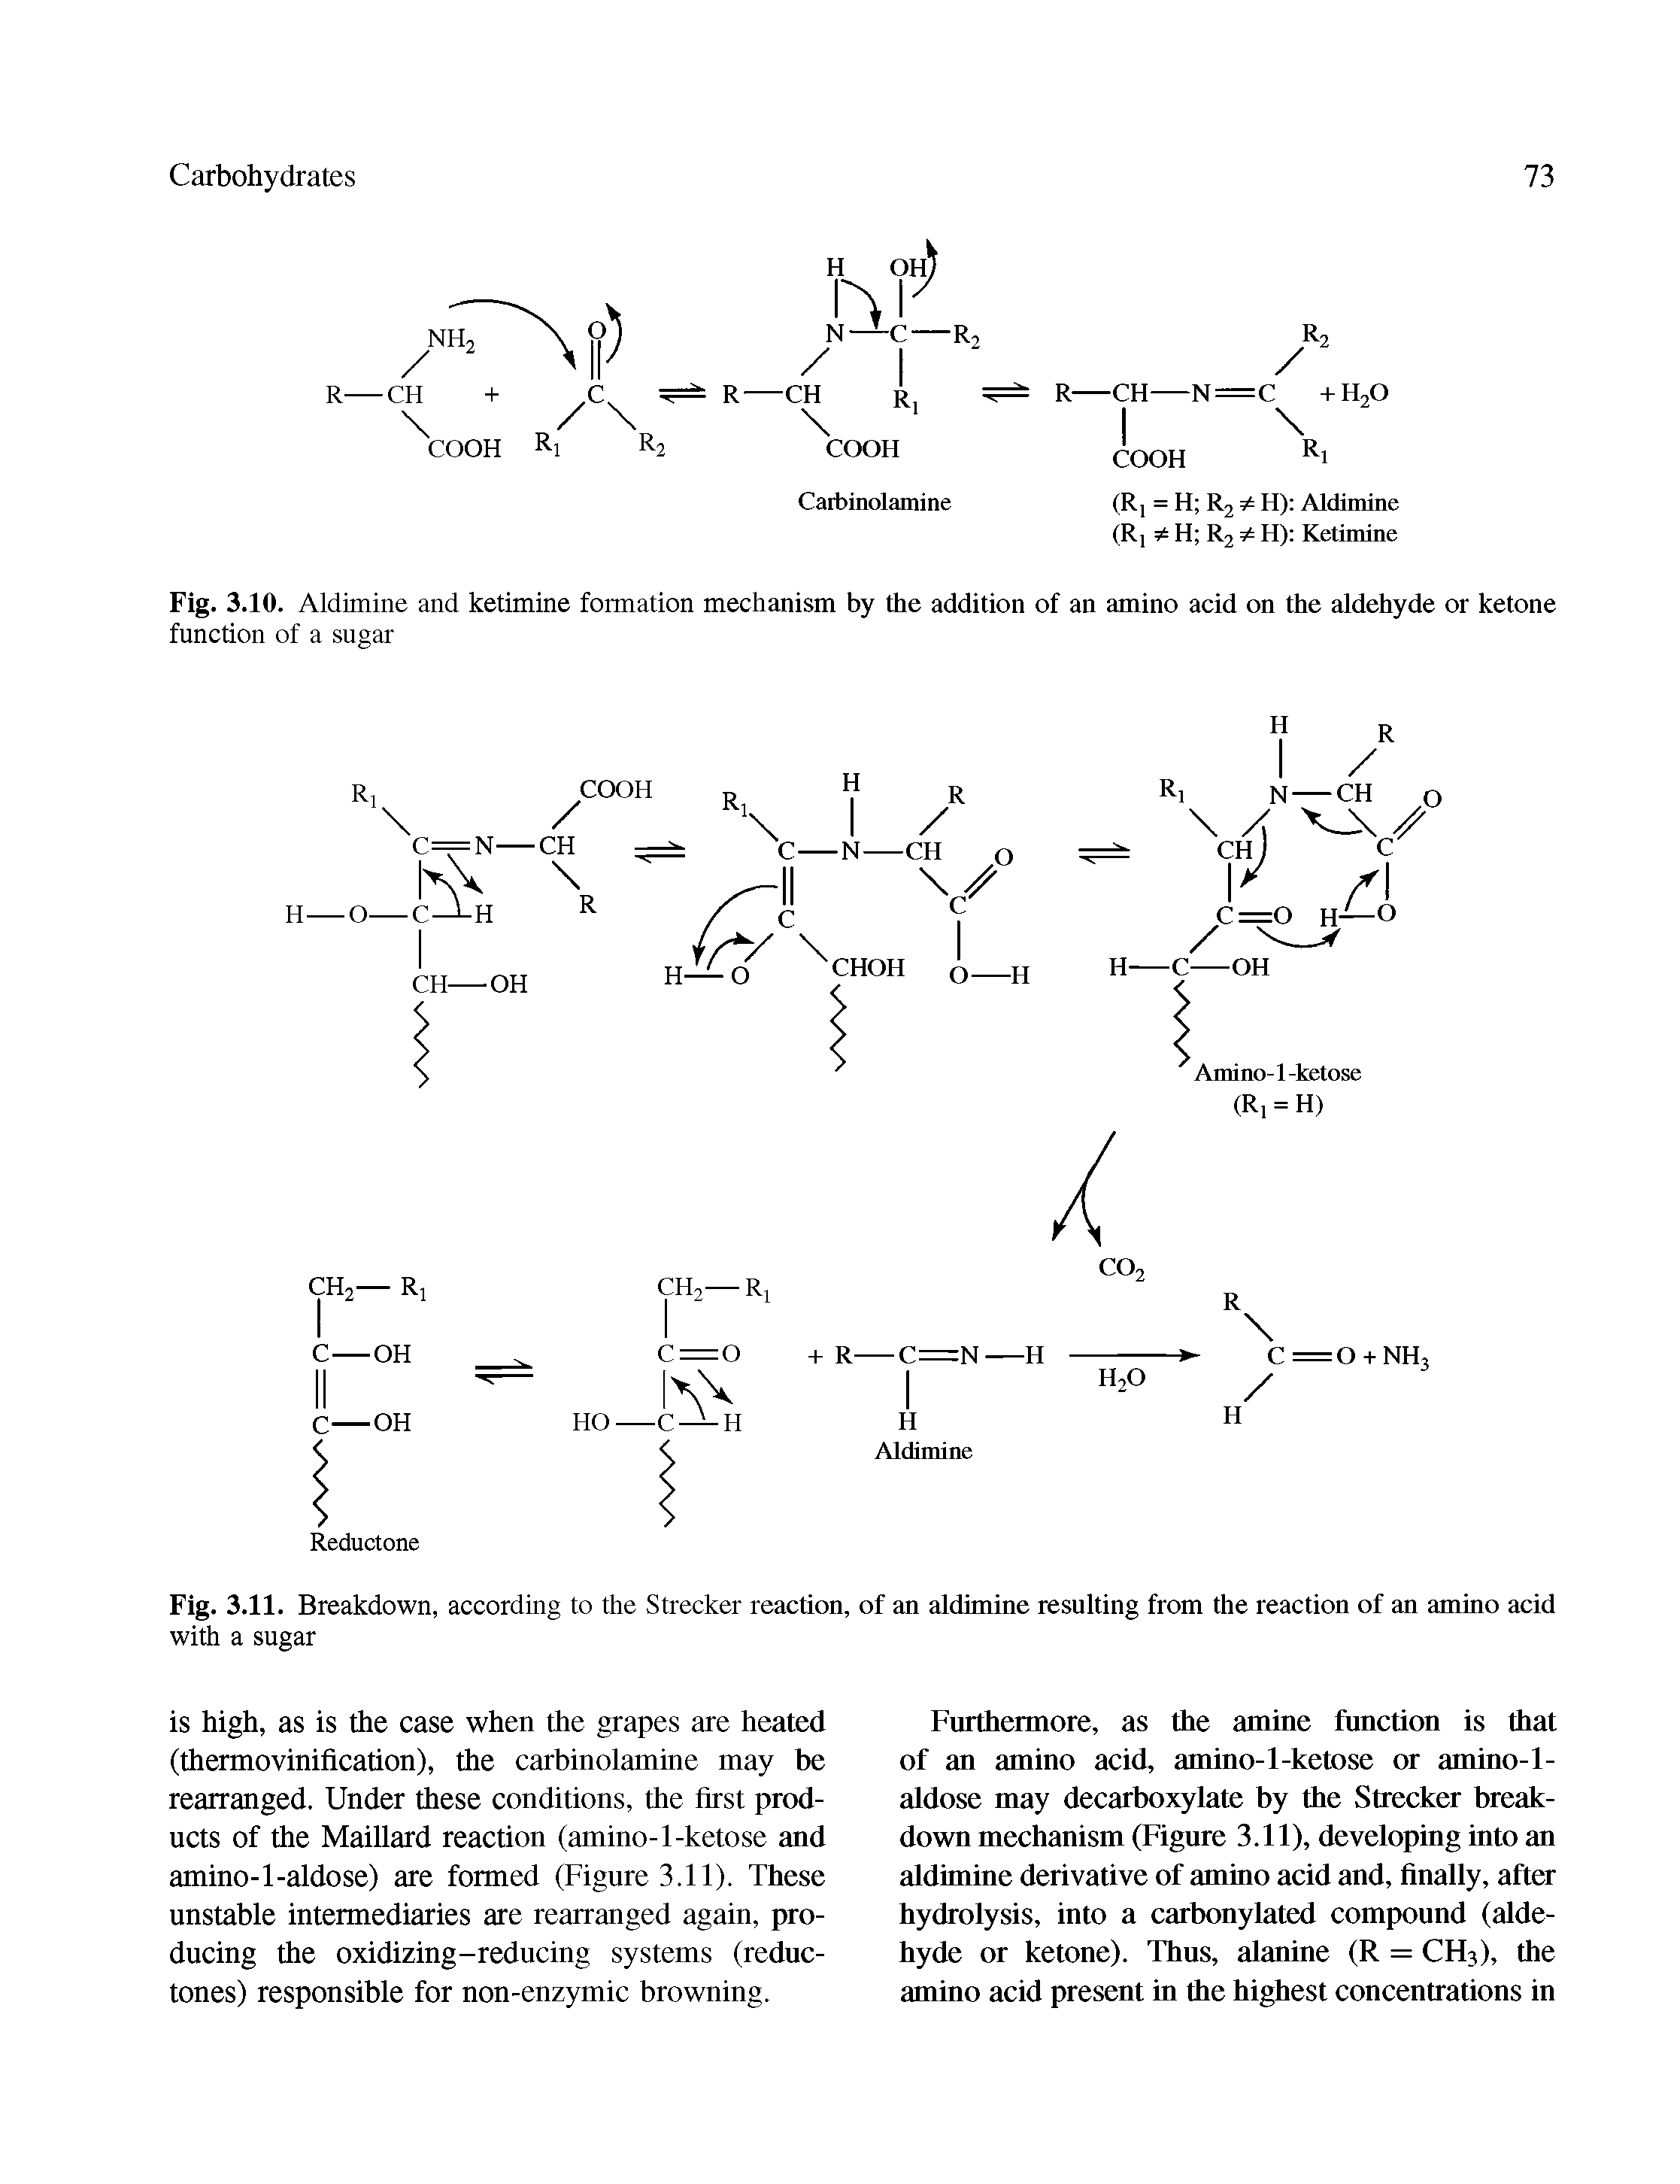 Fig. 3.10. Aldimine and ketimine formation mechanism by the addition of an amino acid on the aldehyde or ketone function of a sugar...